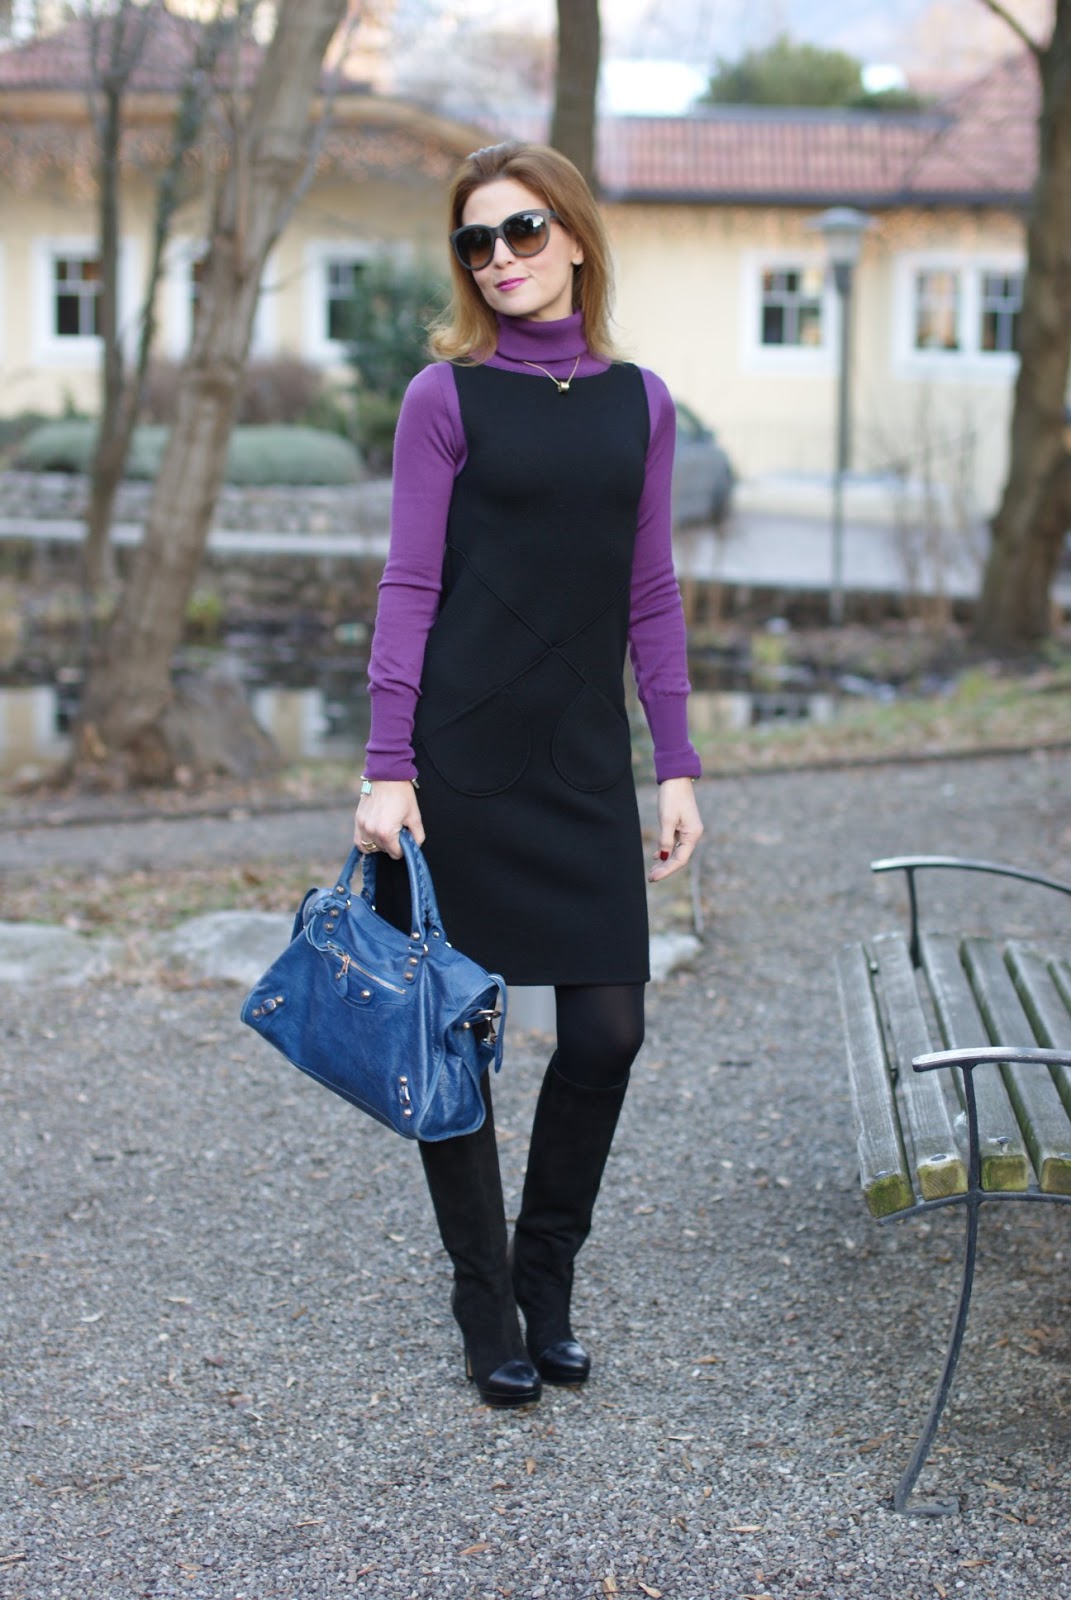 Front pockets dress | Fashion and Cookies - fashion and beauty blog